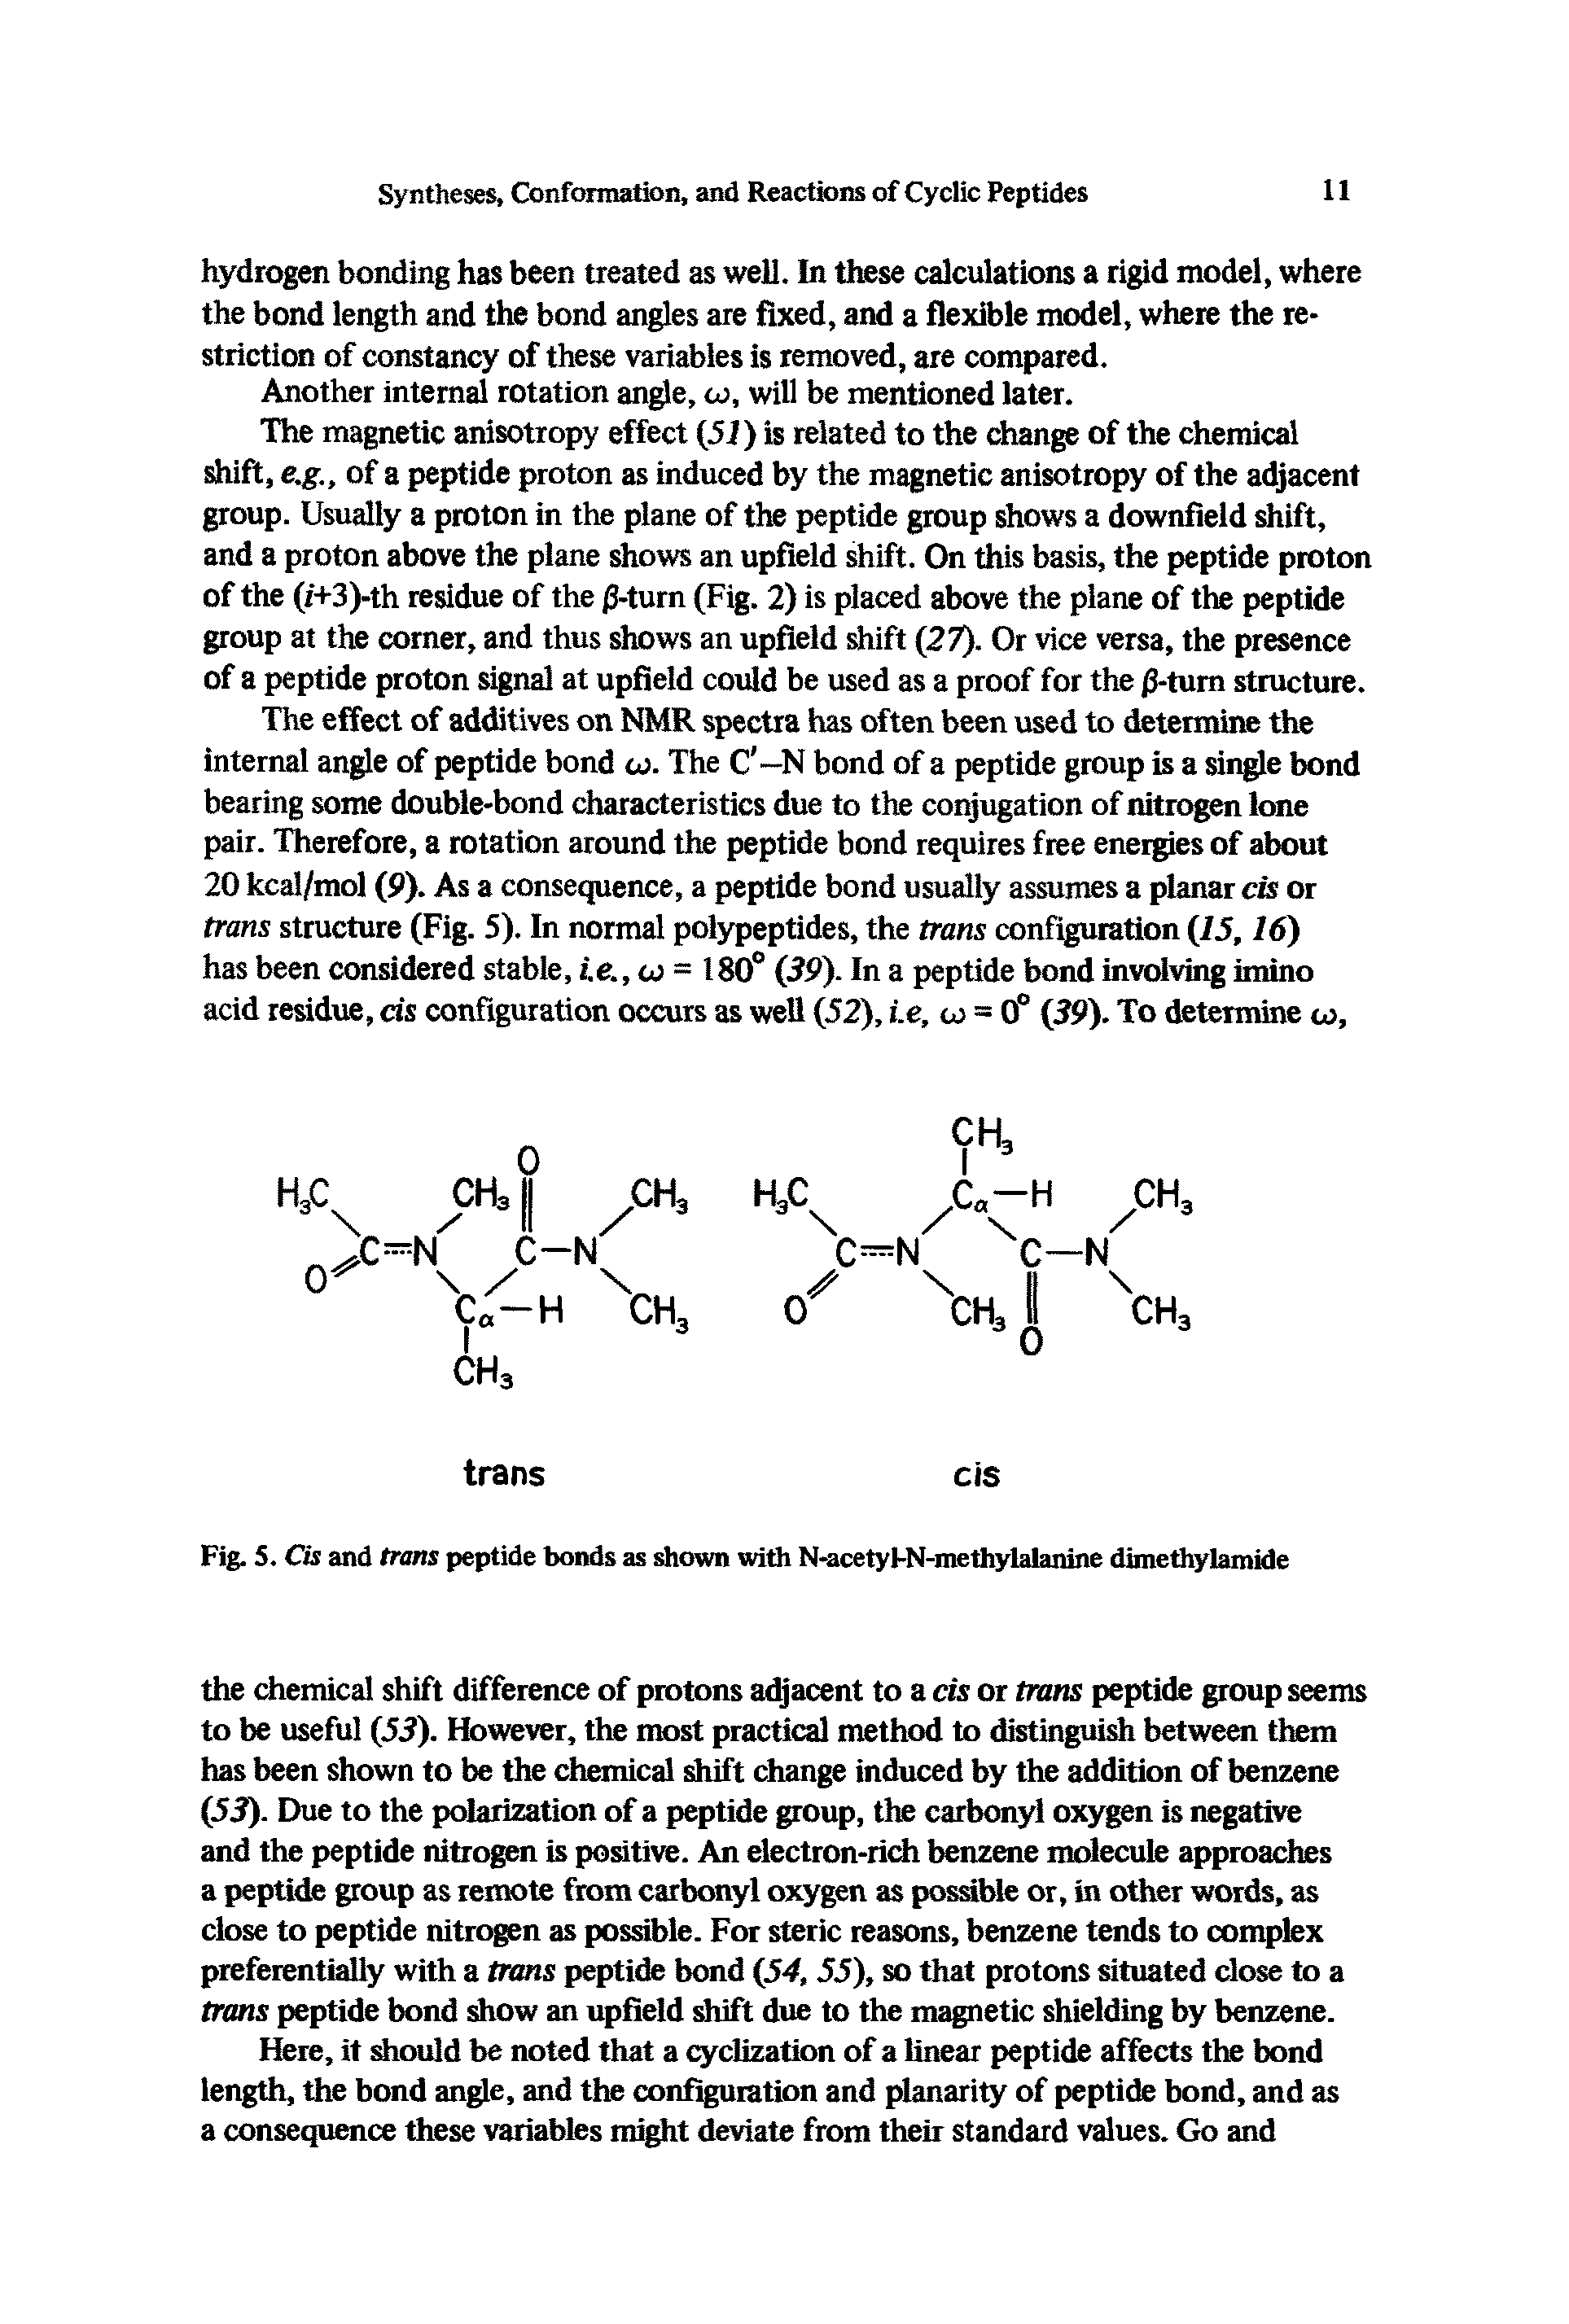 Fig. 5. Gs and trans peptide bonds as shown with N-acetyFN-methylalanine dimethylamide...